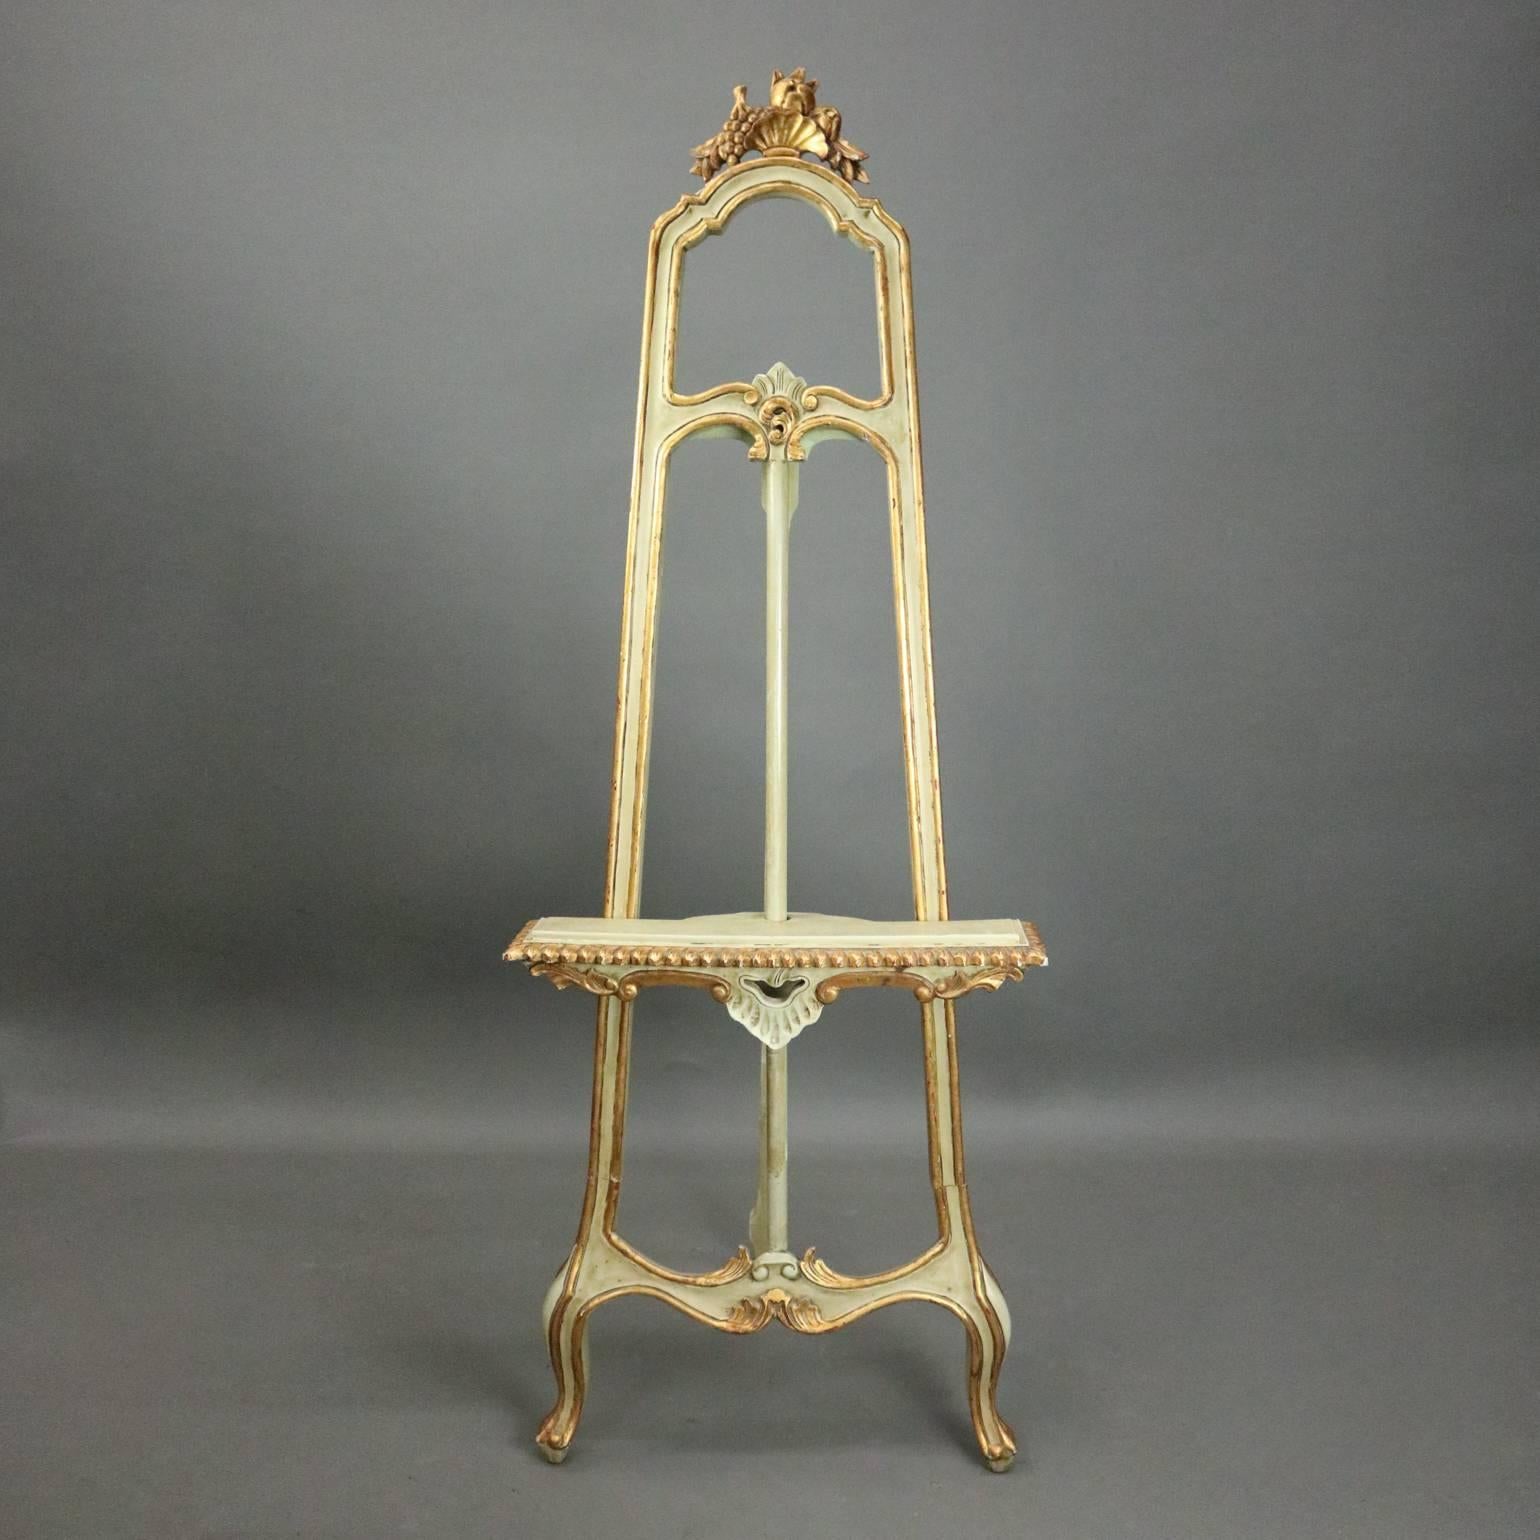 Vintage French, Louis XIV style adjustable art easel features gilt decorated painted wood construction with foliate, bead, and shell decoration, seated on cabriole legs and topped with carved fruit and nut pierced crest, adjustable, circa